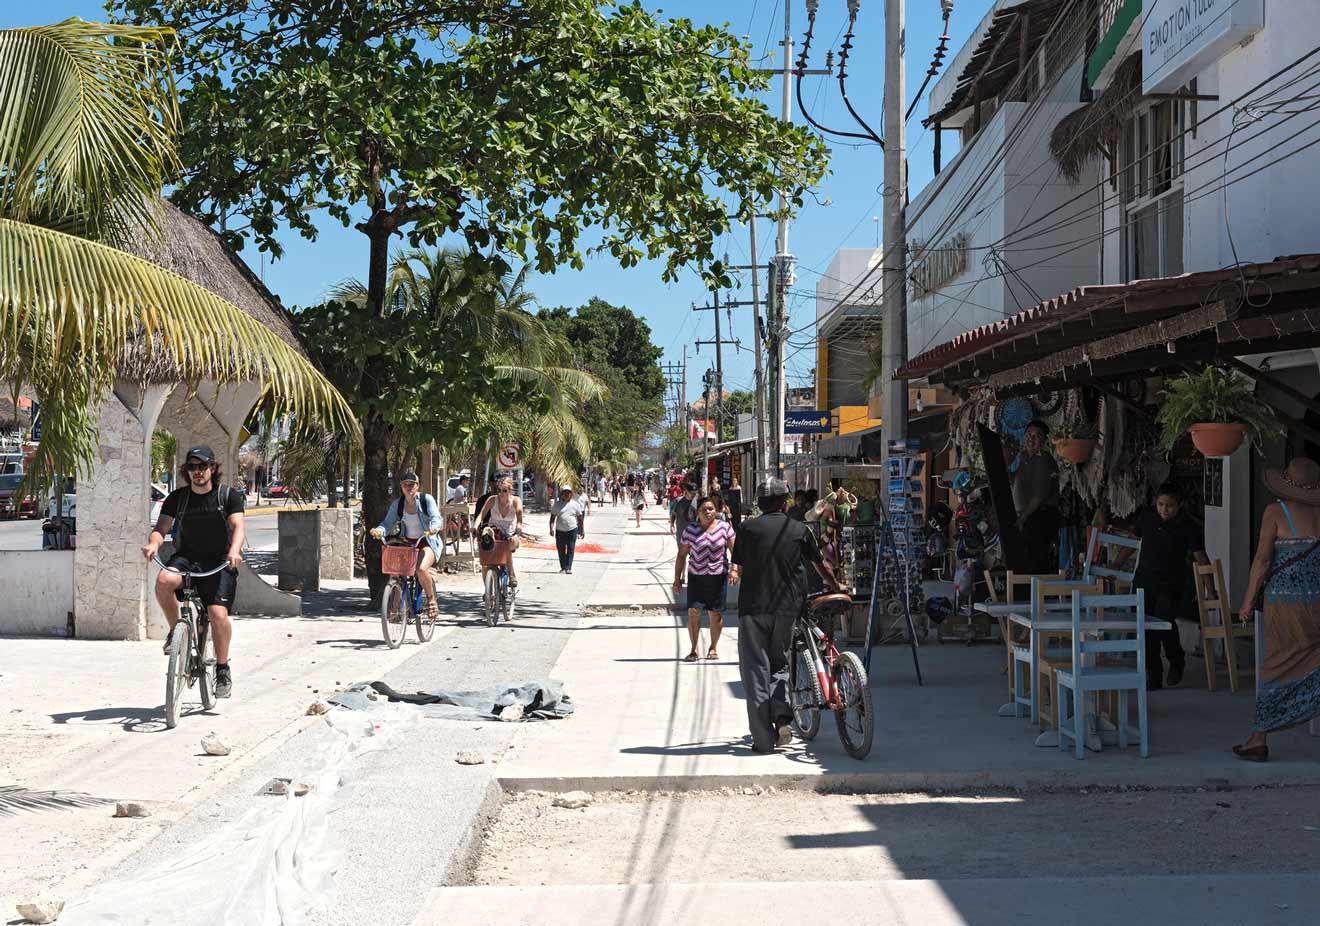 People walking and cycling on a sunlit street lined with shops on one side and trees on the other.